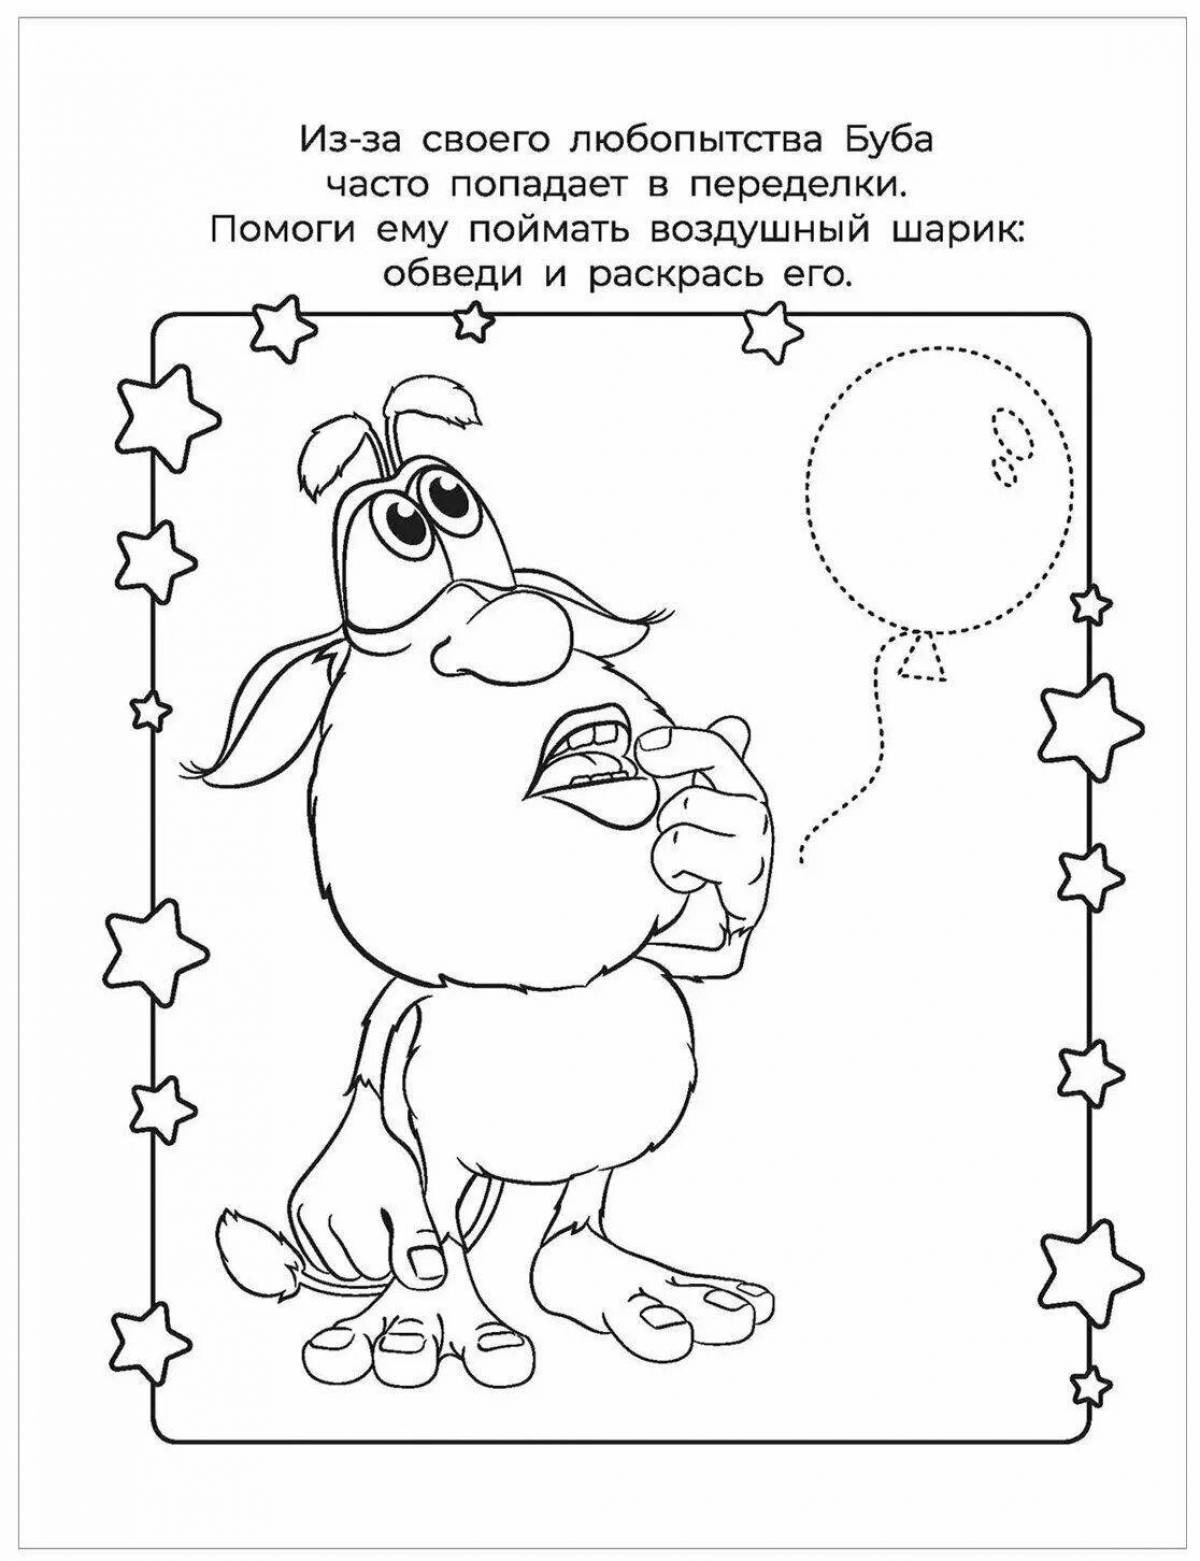 Exciting buba coloring book for kids